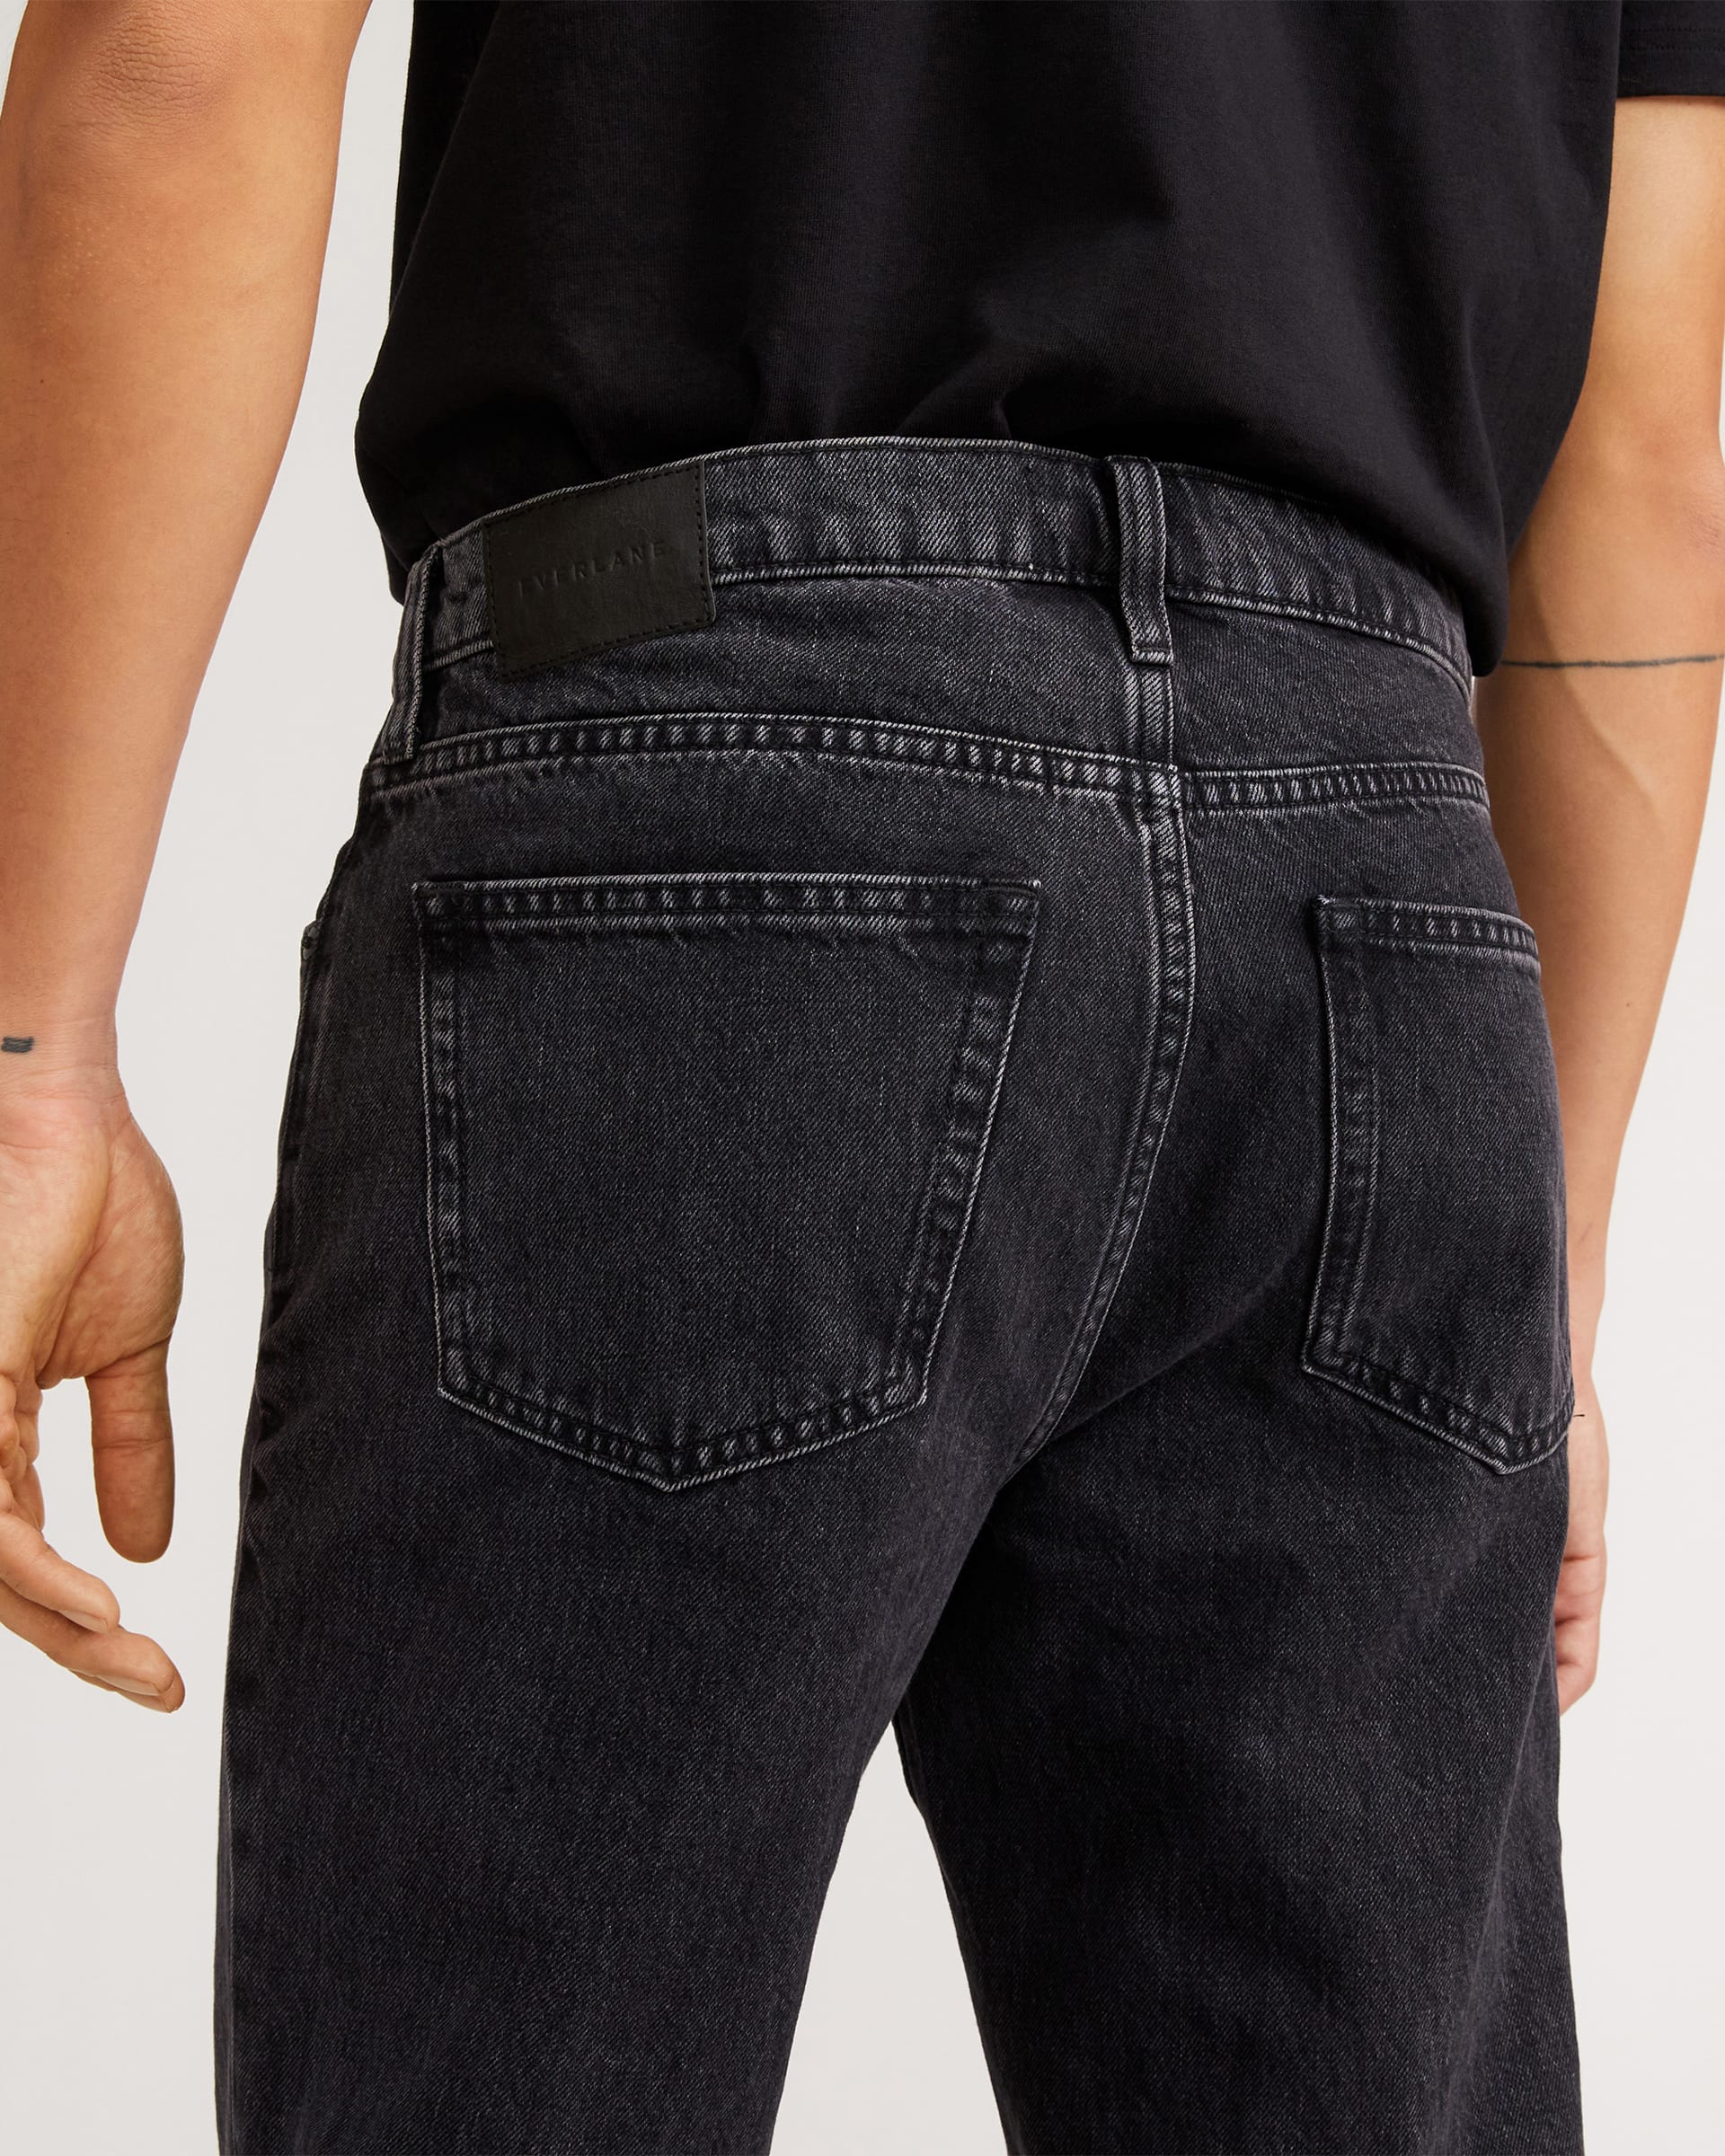 The Authentic Straight Jean Washed Black – Everlane